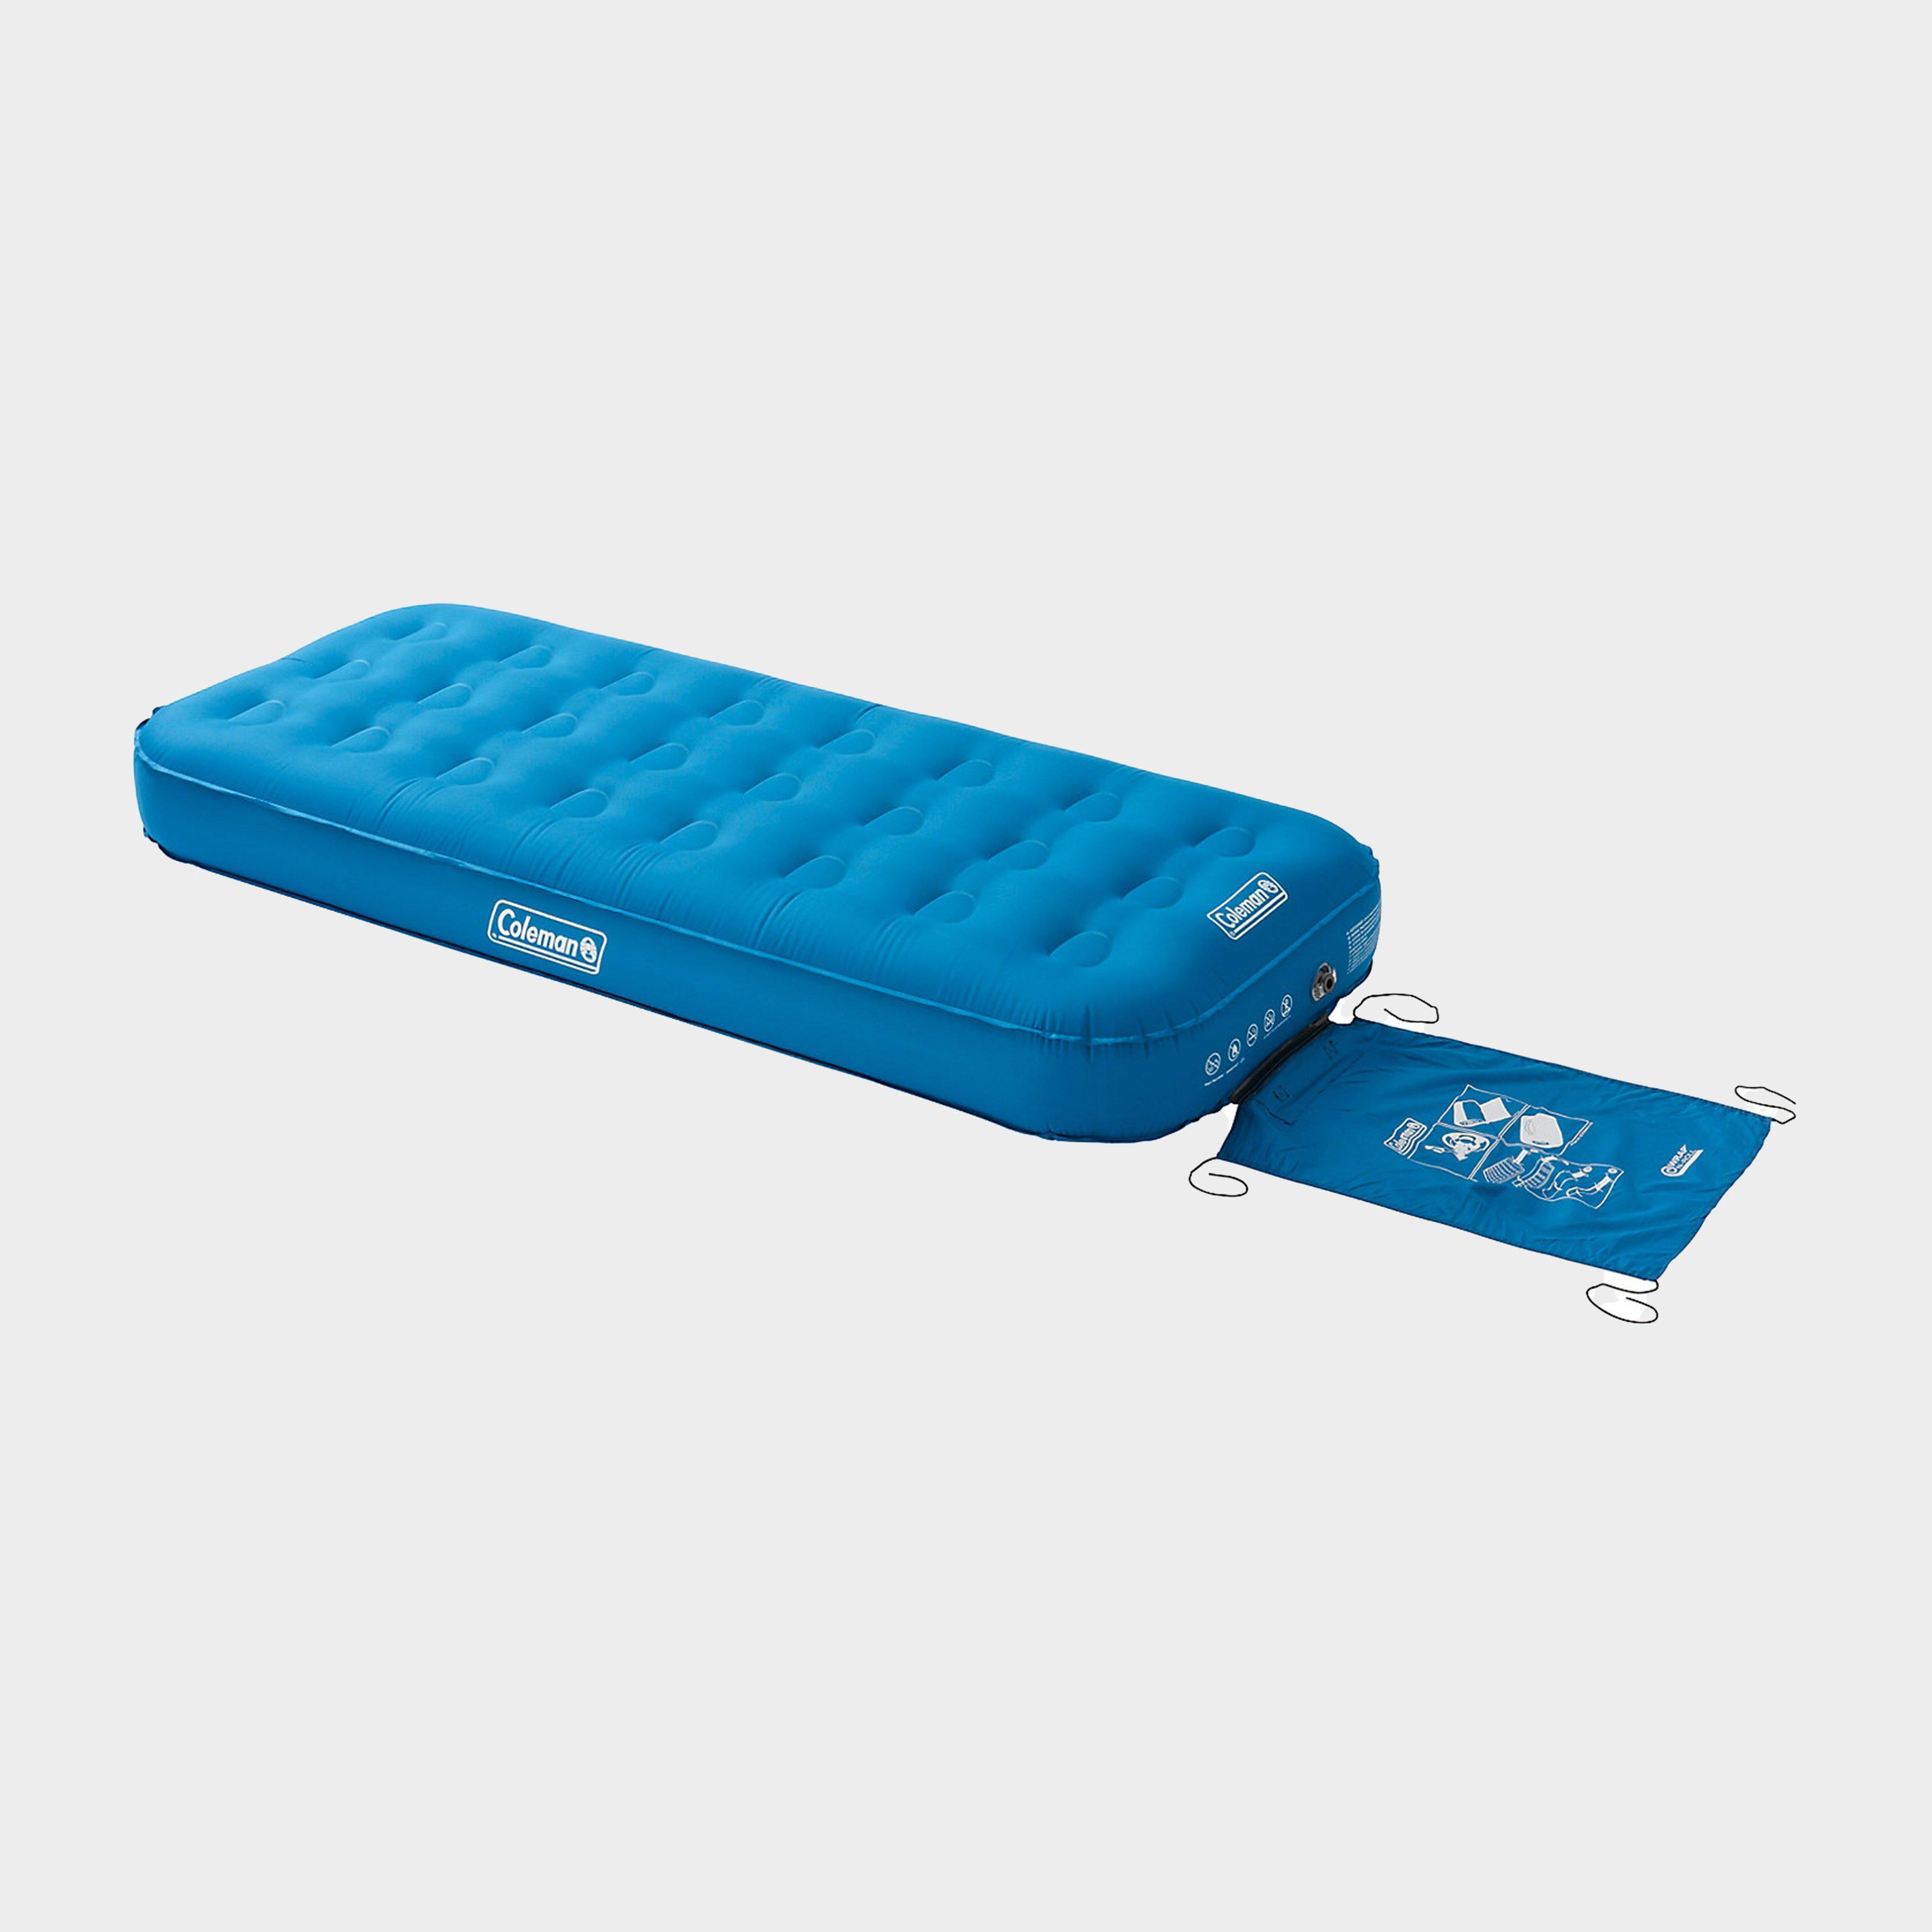  COLEMAN Extra Durable Single Air Bed, Blue